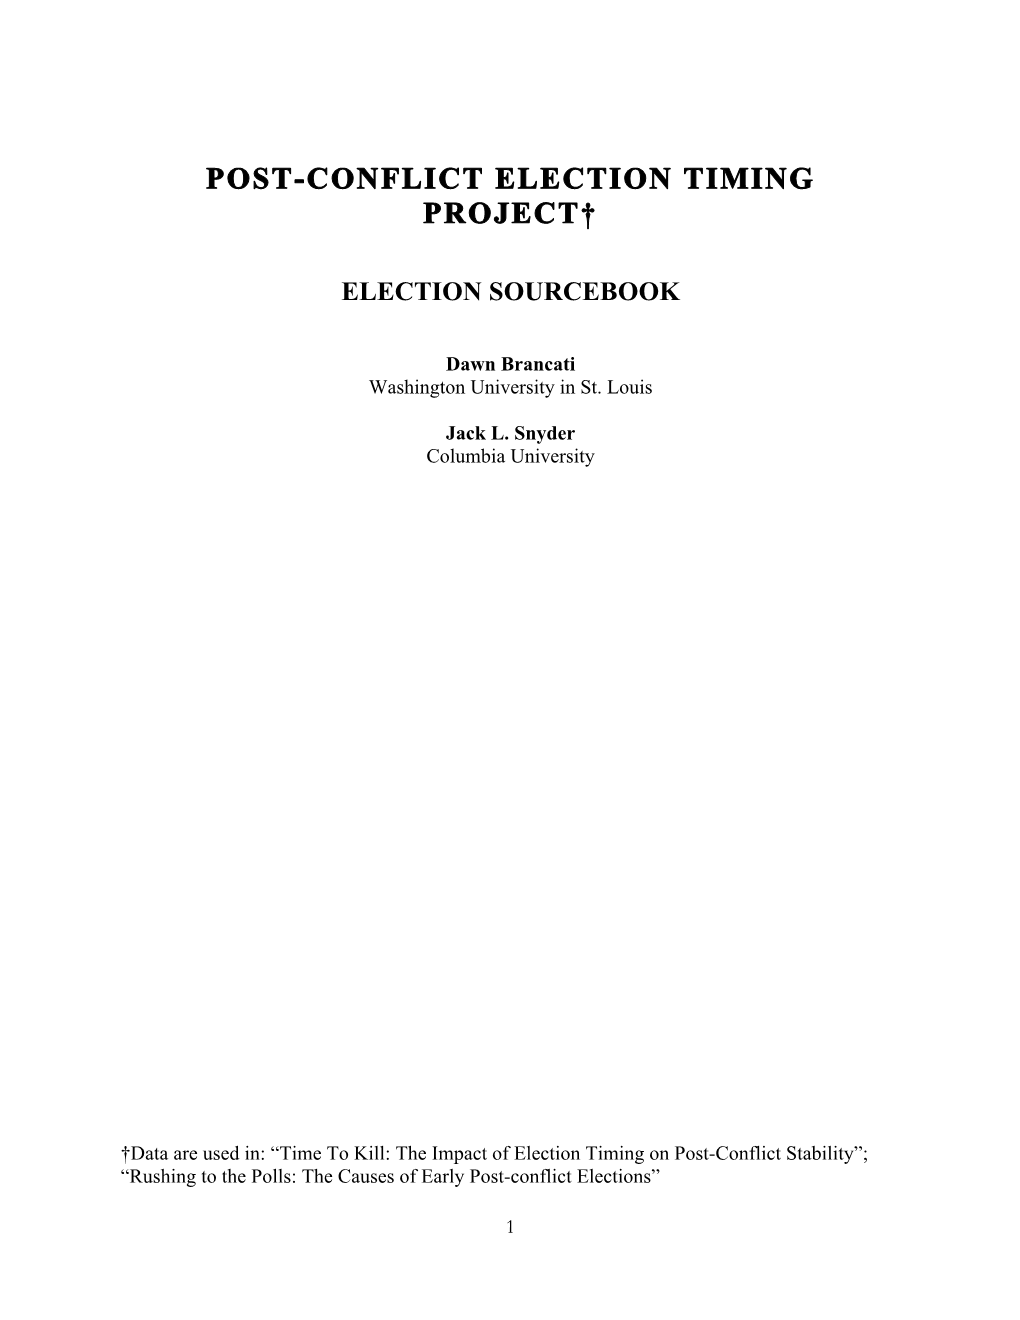 Post-Conflict Elections”